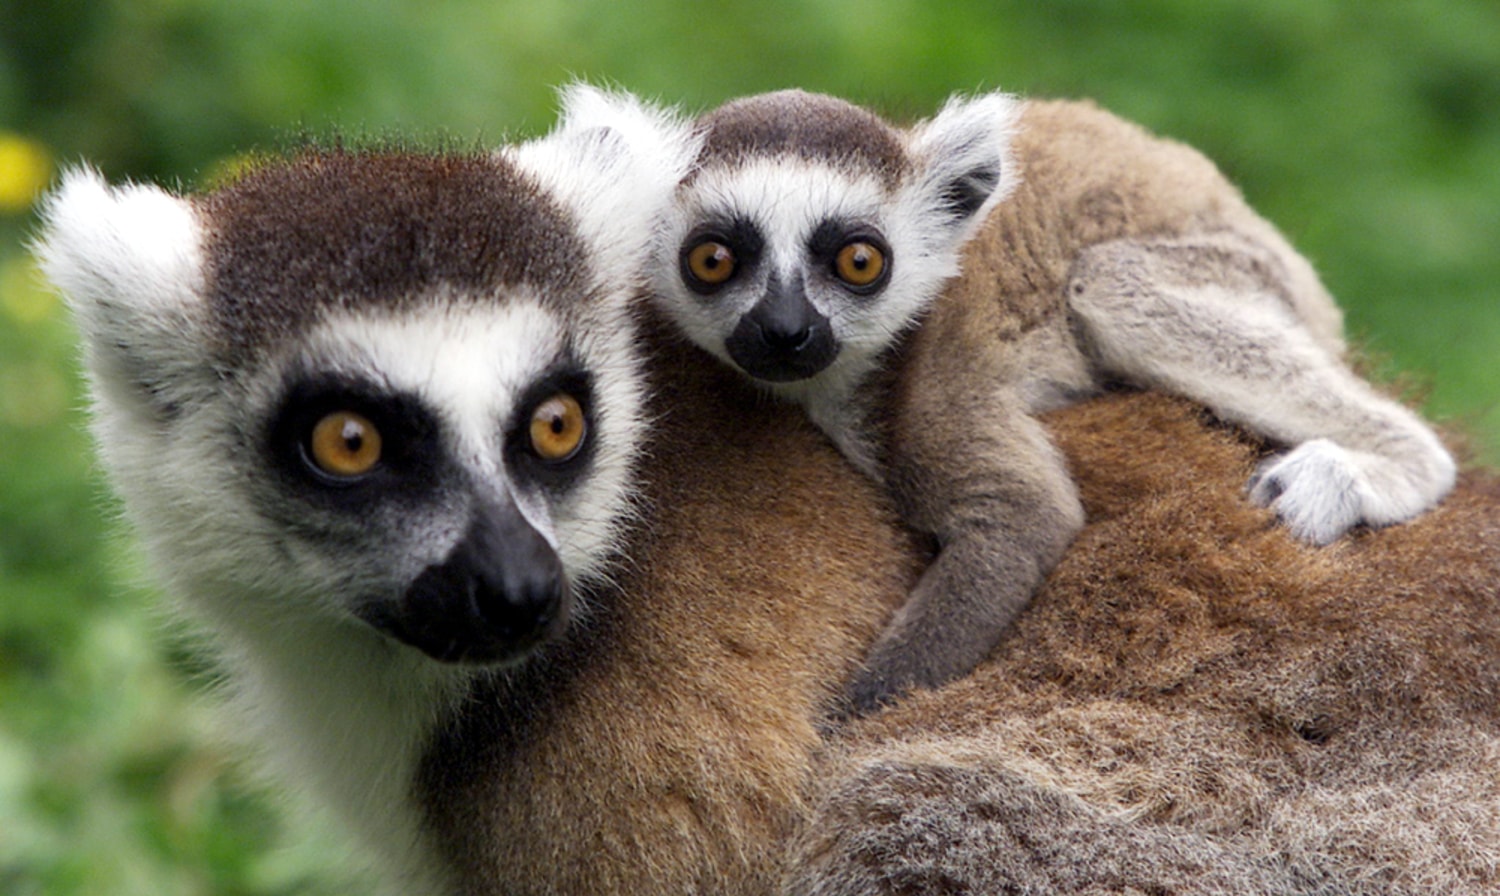 Lemurs may not be so dumb after all